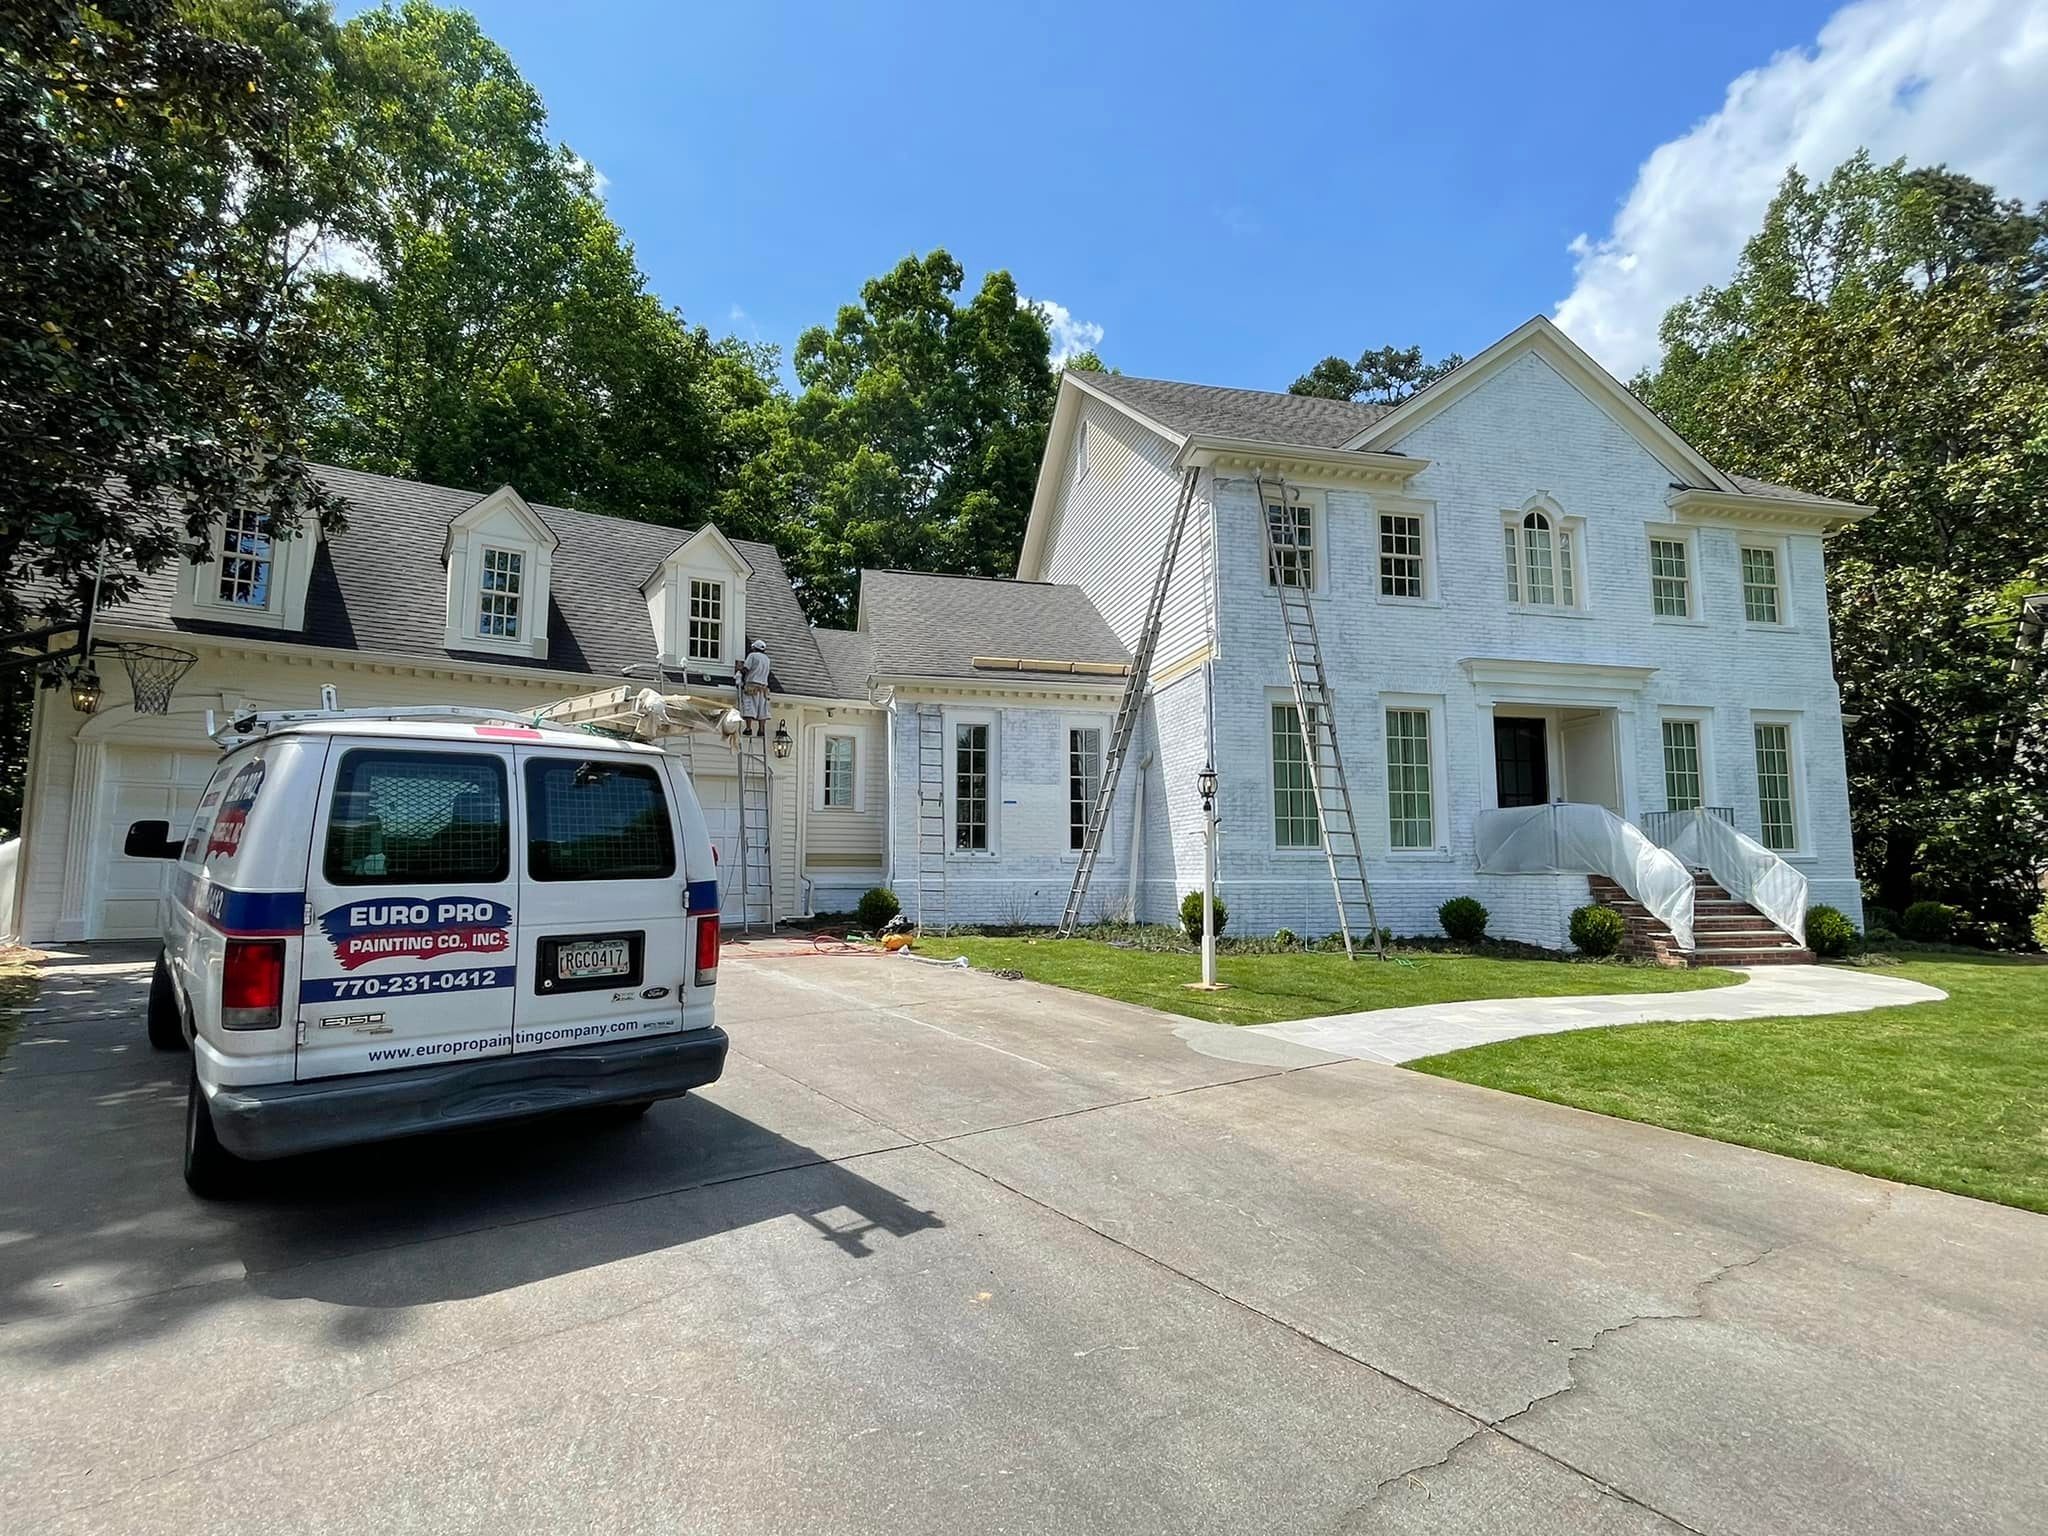 Euro Pro Painting Company team in Lawerenceville, GA - people or person